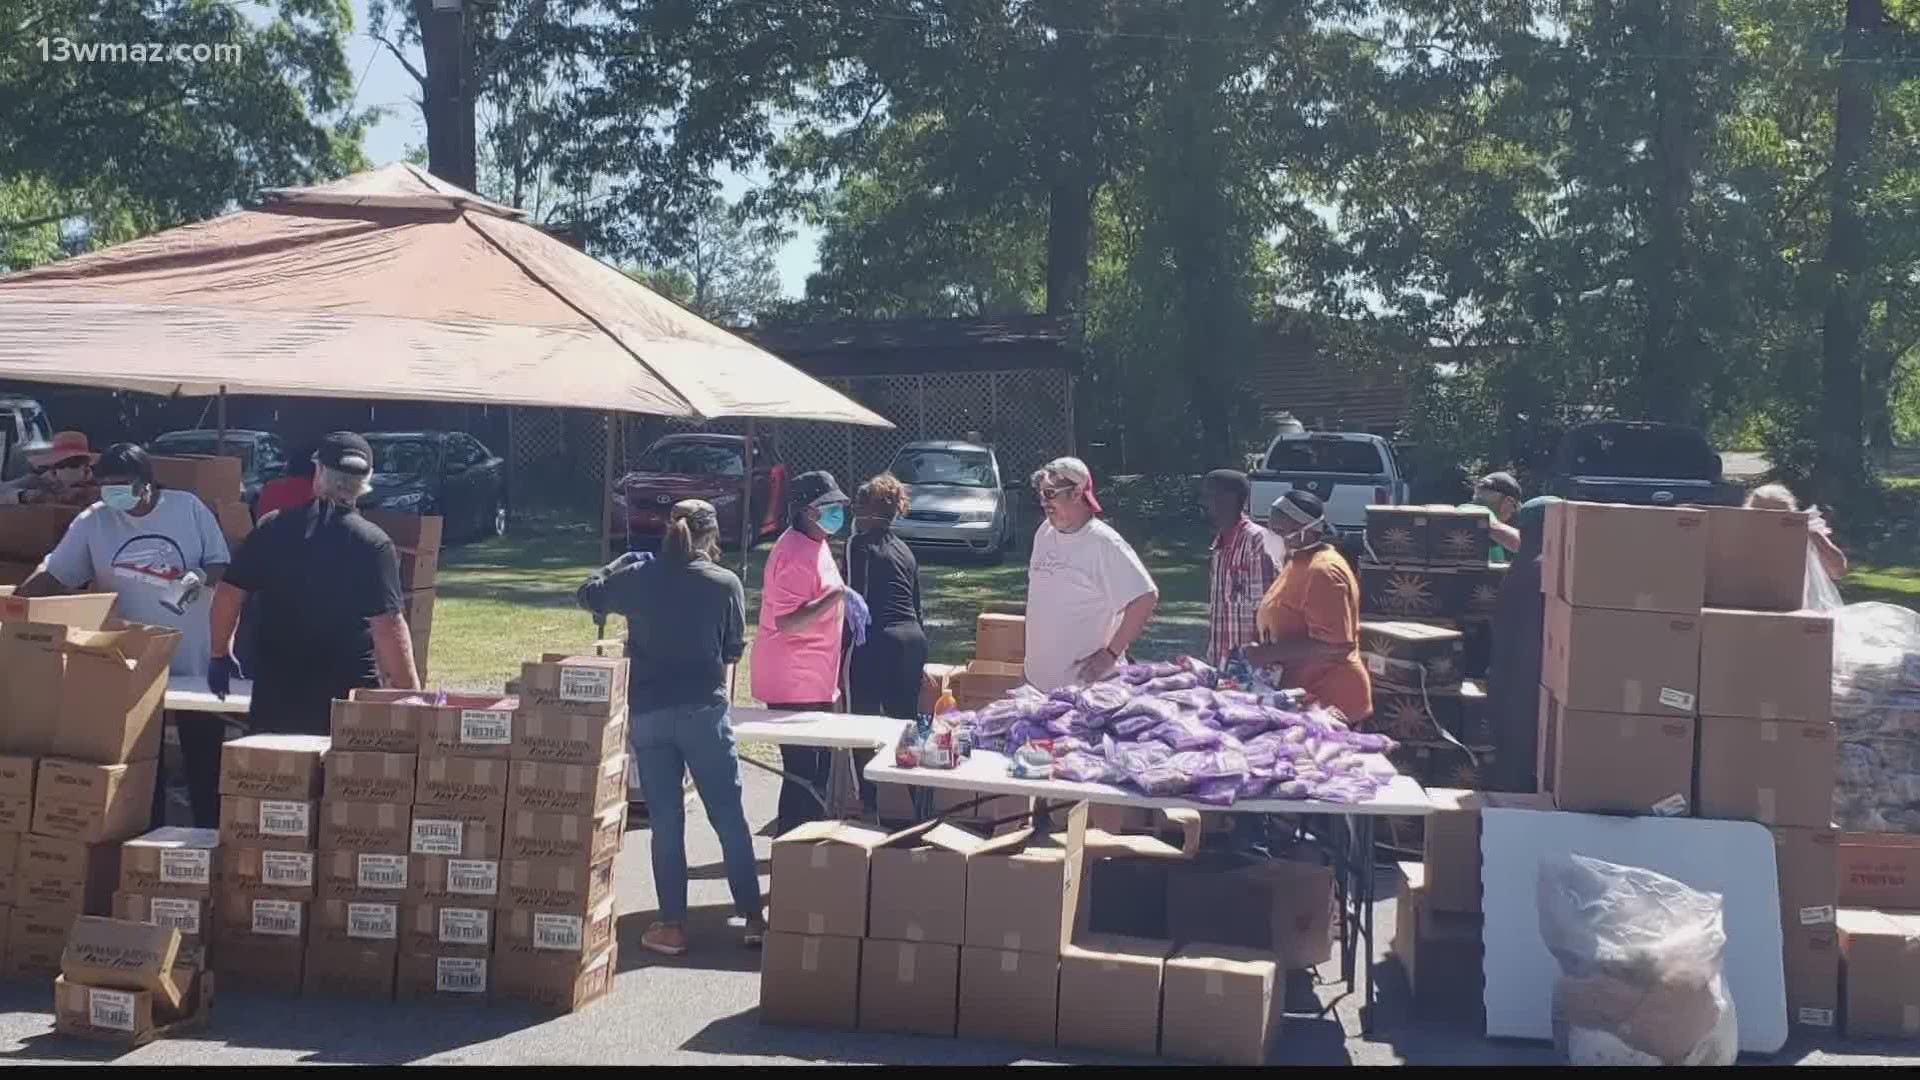 Jordan Chapel AME Church is sponsoring the Velma McFadden Missionary Food Bank distribution Wednesday from 11:30 a.m. to 1:30 p.m. on Bowen Hill Road in Haddock.